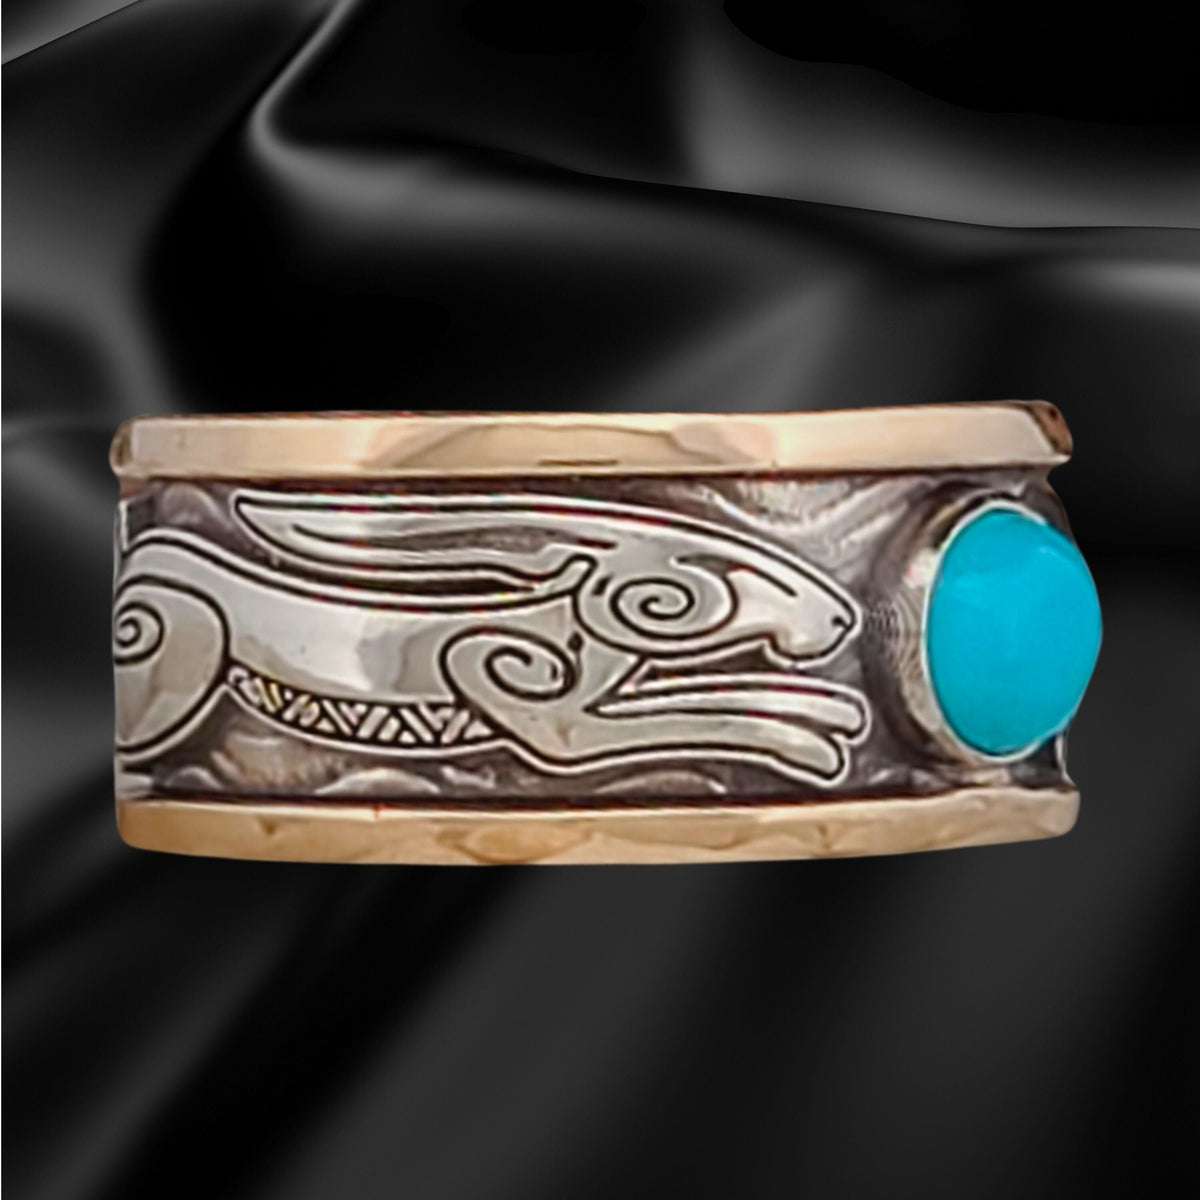 FREYJA&#39;S HARES SOLITAIRE BAND RING with TURQUOISE CABACHON 925 Sterling Silver or Continuum Silver or Silver+Gold 2-Tone